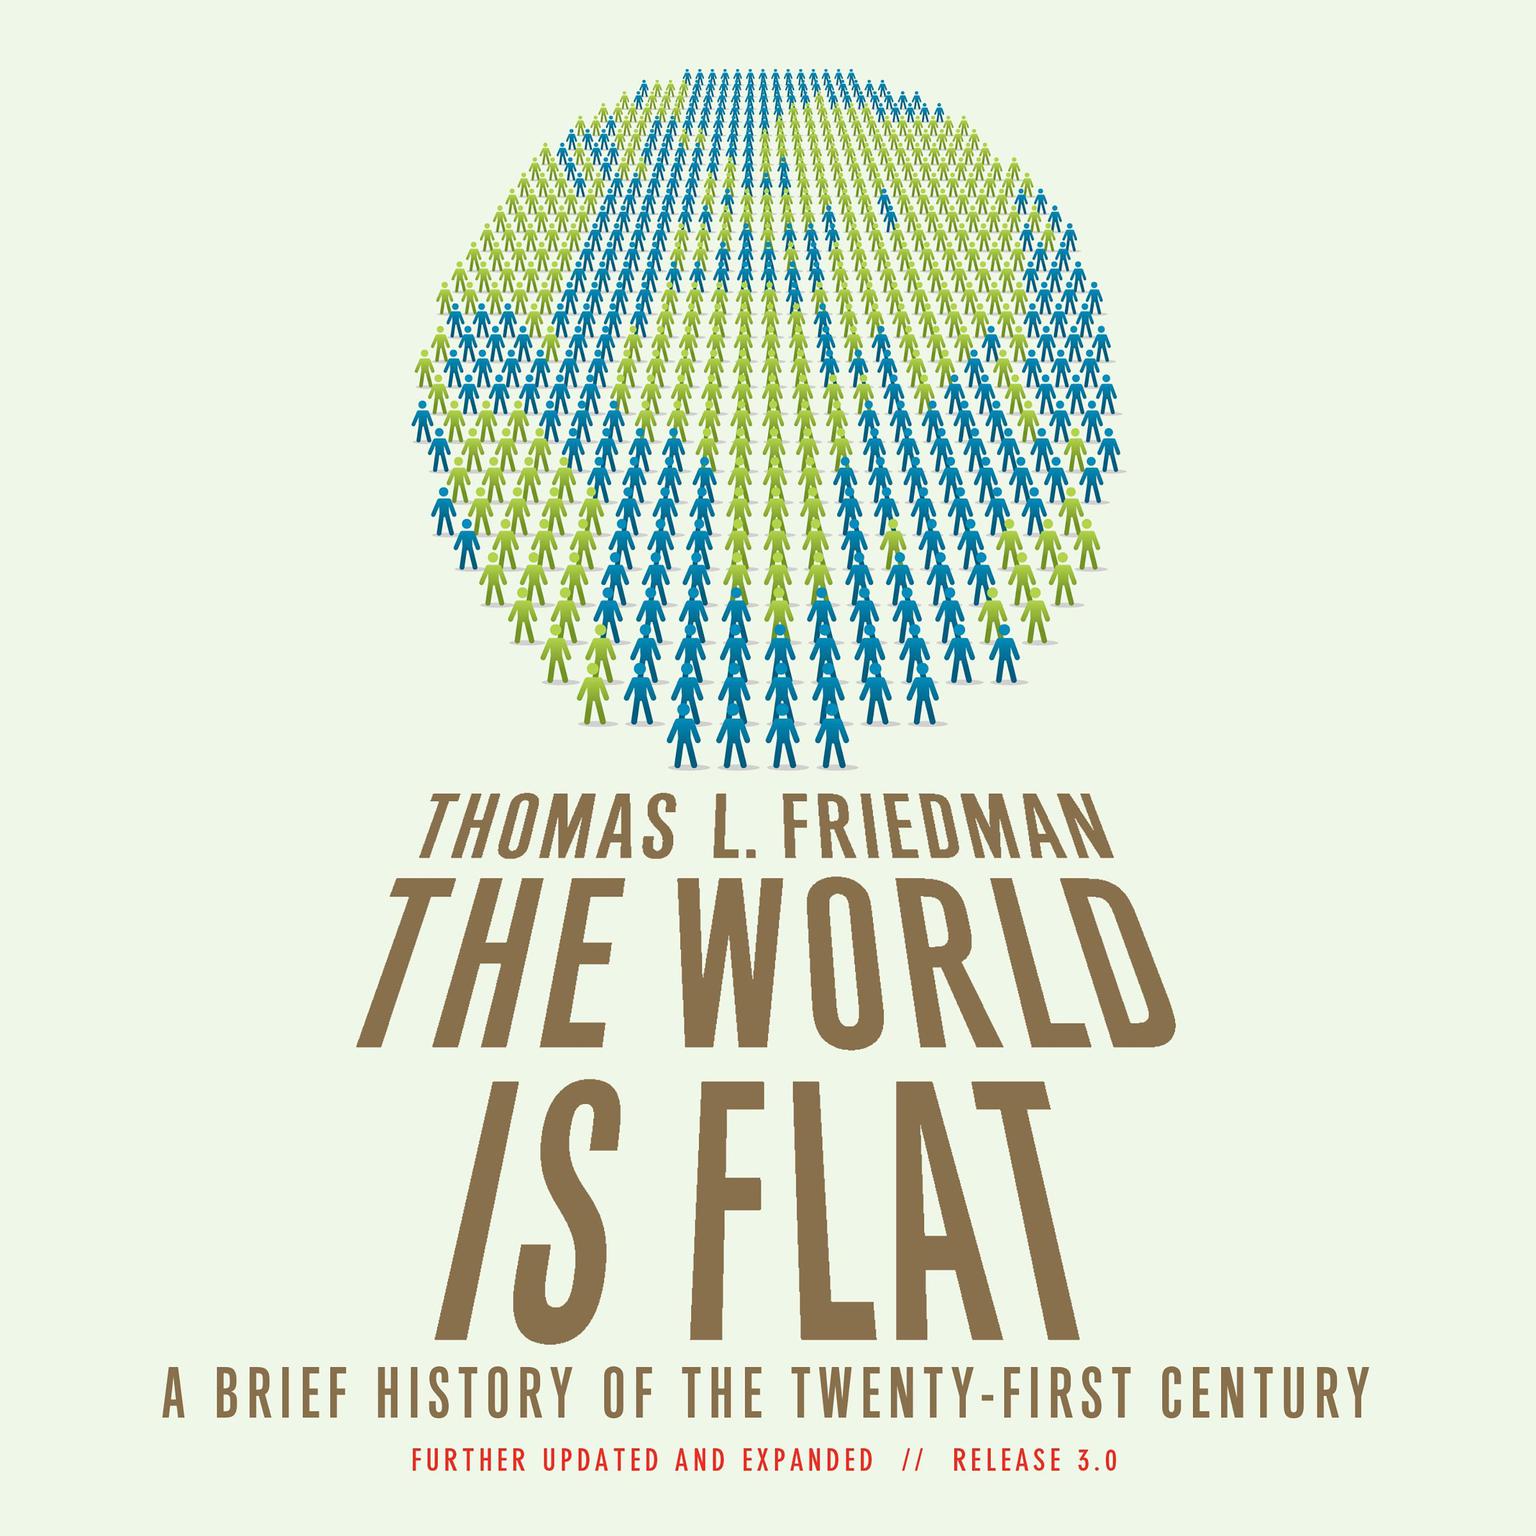 The World Is Flat 3.0: A Brief History of the Twenty-first Century Audiobook, by Thomas L. Friedman